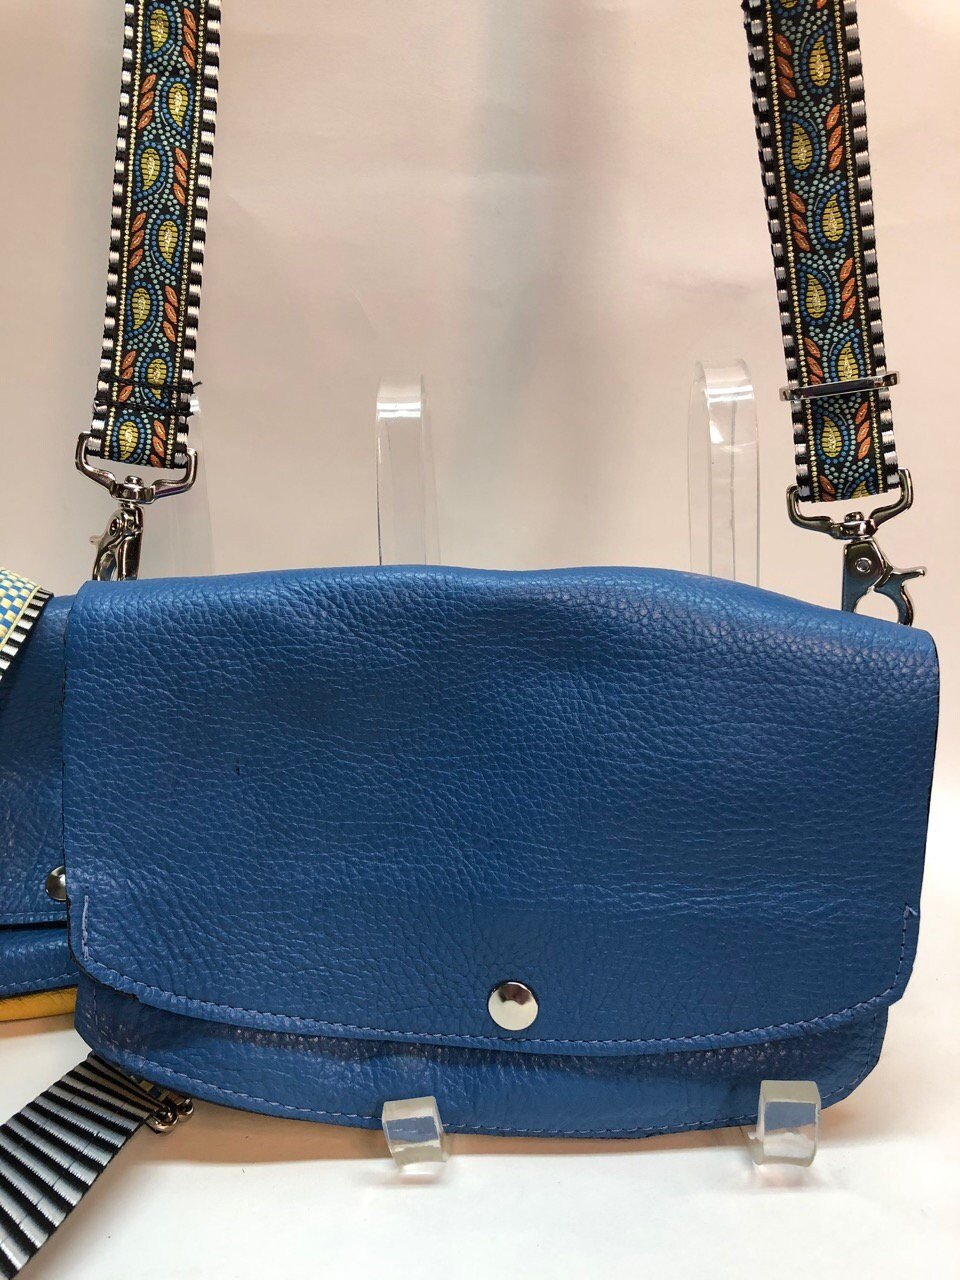 Bags with fully detachable straps? : r/handbags